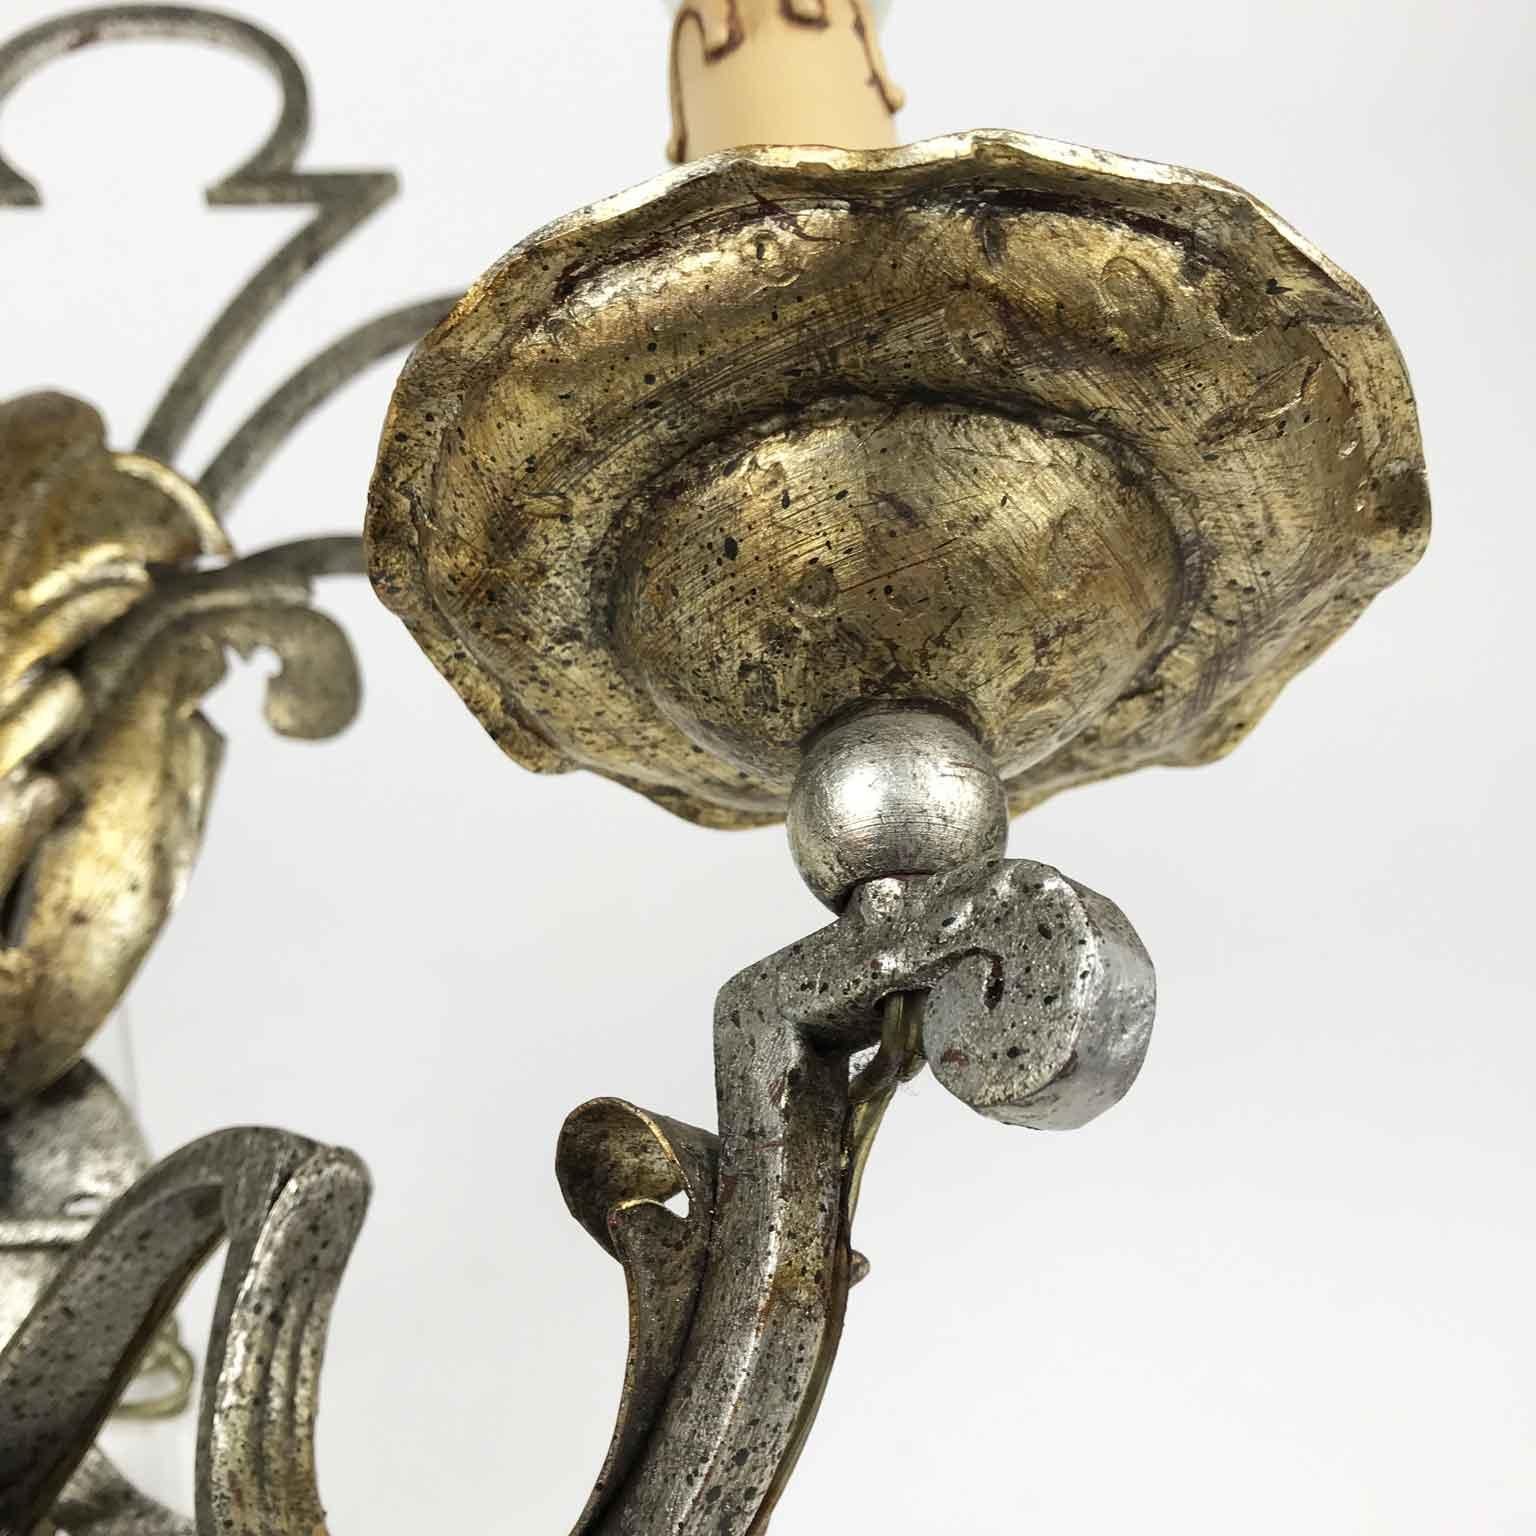 20th Century Italian Florentine Pair of Iron Sconces by Banci Firenze 1980 Renaissance Style For Sale